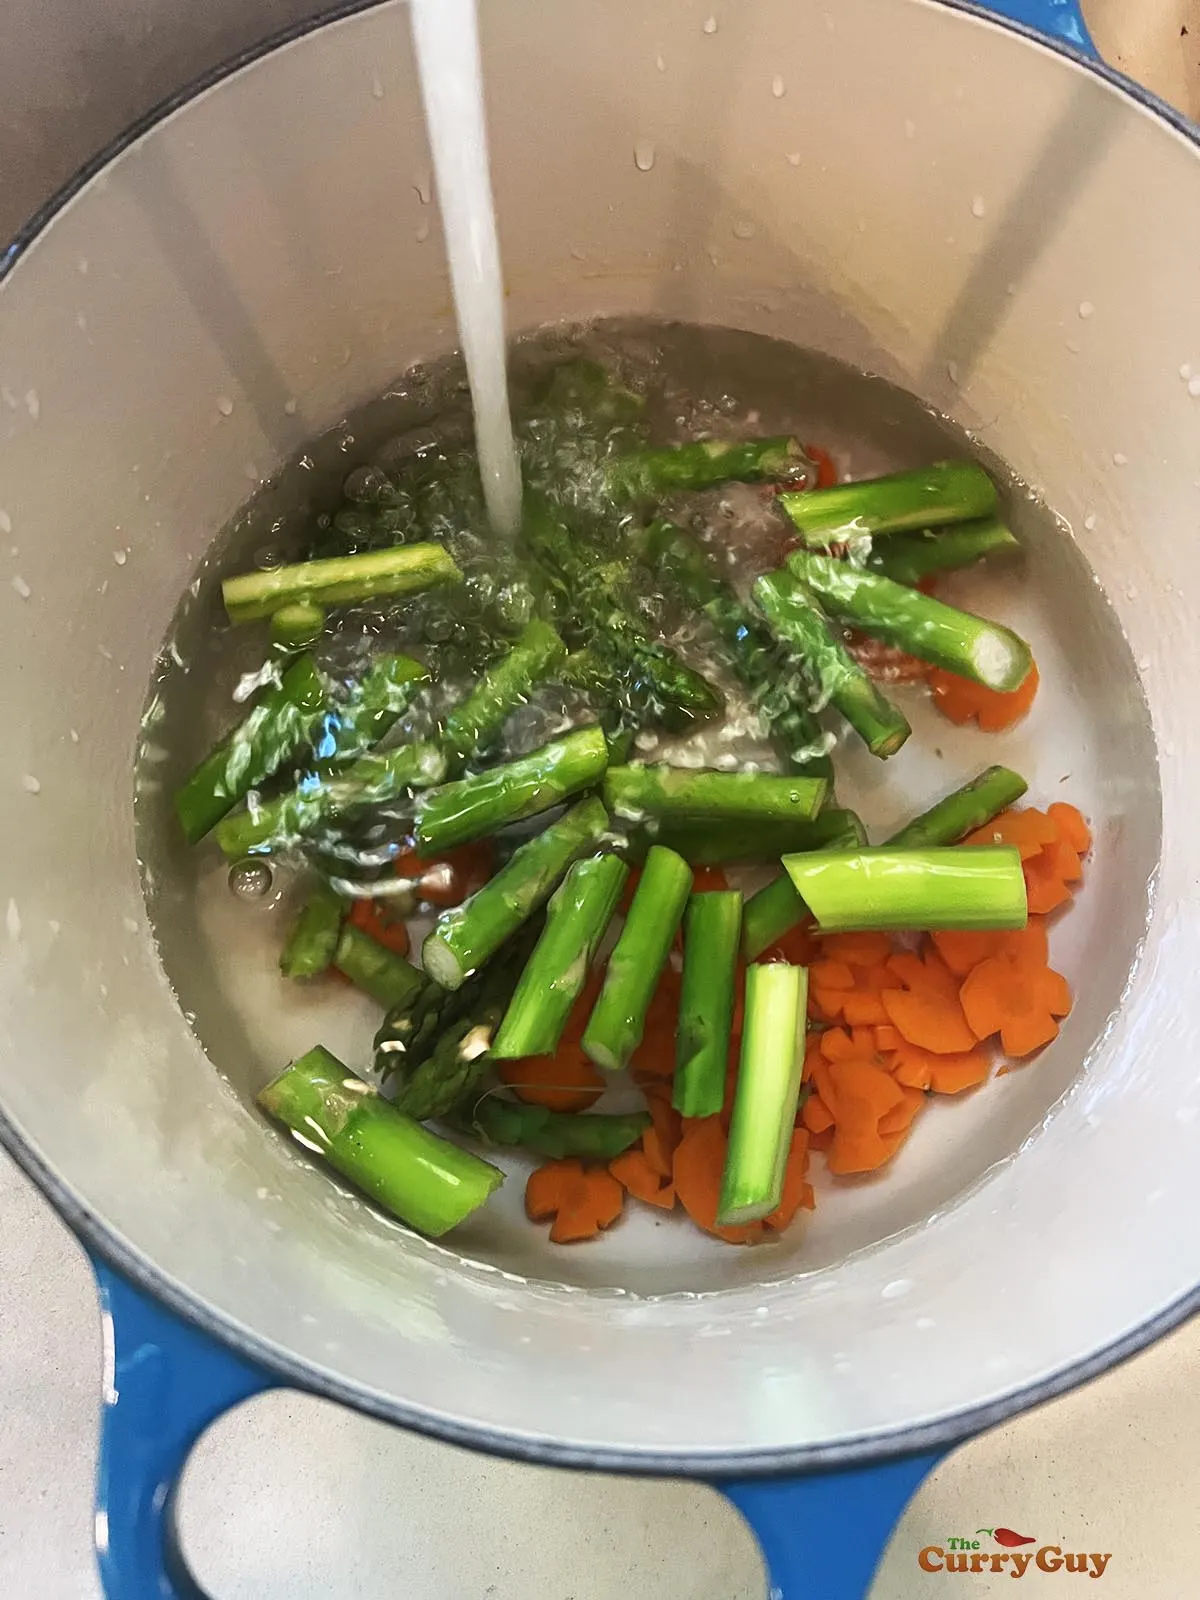 Running cold water of the strained asparagus and carrots.